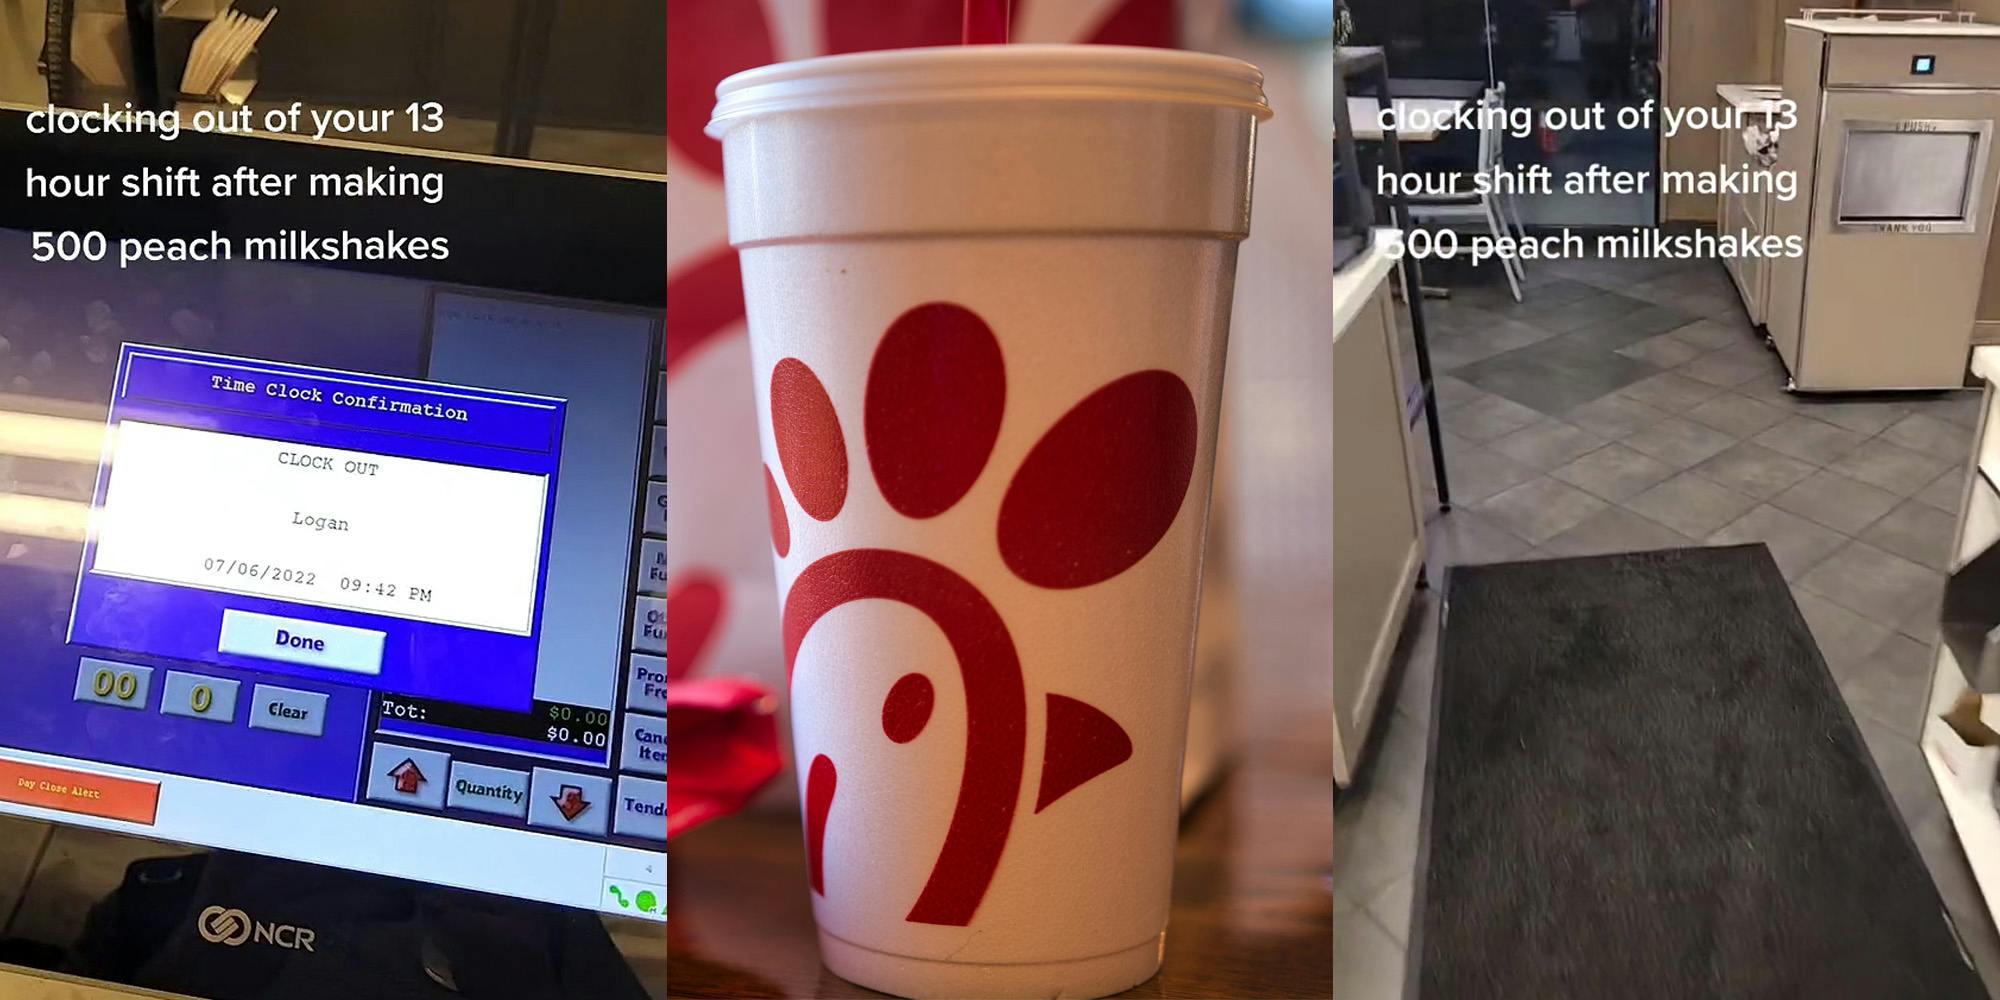 Chick-fil-a worker clock out on computer screen caption "clocking out of your 13 hour shift after making 500 peach milkshakes" (l) Chick-fil-a cup with logo (c) Chick-fil-a worker exiting restaurant caption "clocking out of your 13 hour shift after making 500 peach milkshakes" (r)